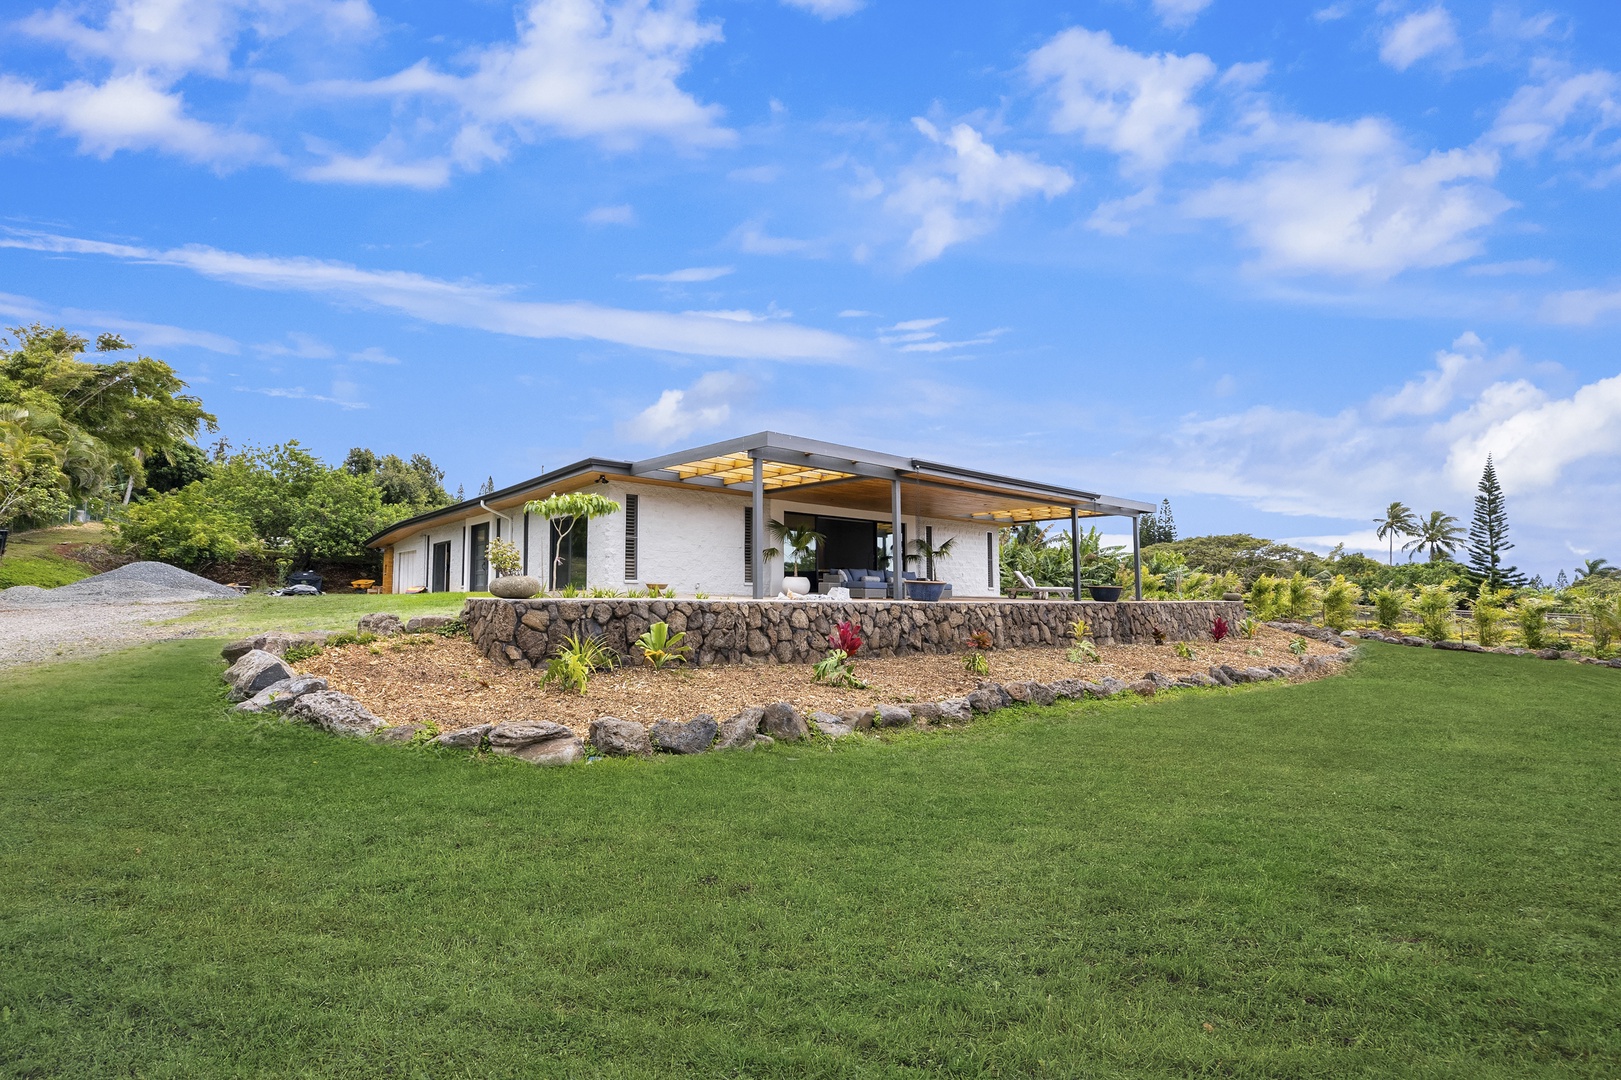 Haleiwa Vacation Rentals, Hale Mahina - Daytime view of the front of the house